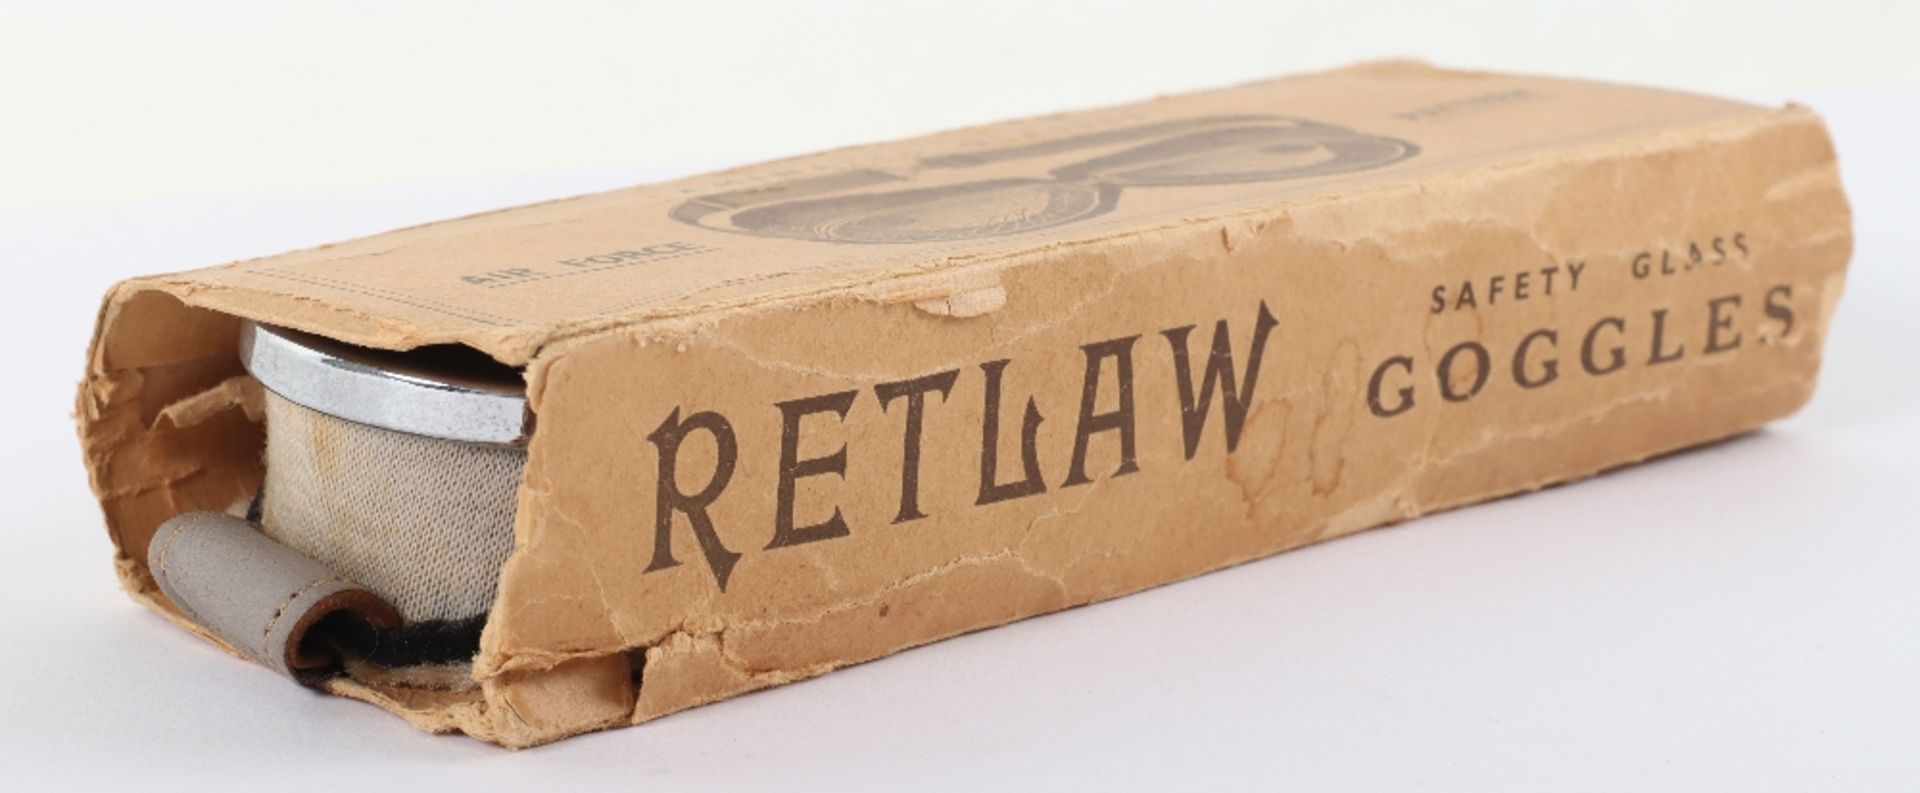 Retlaw Air Force Pattern Flying Goggles - Image 5 of 6